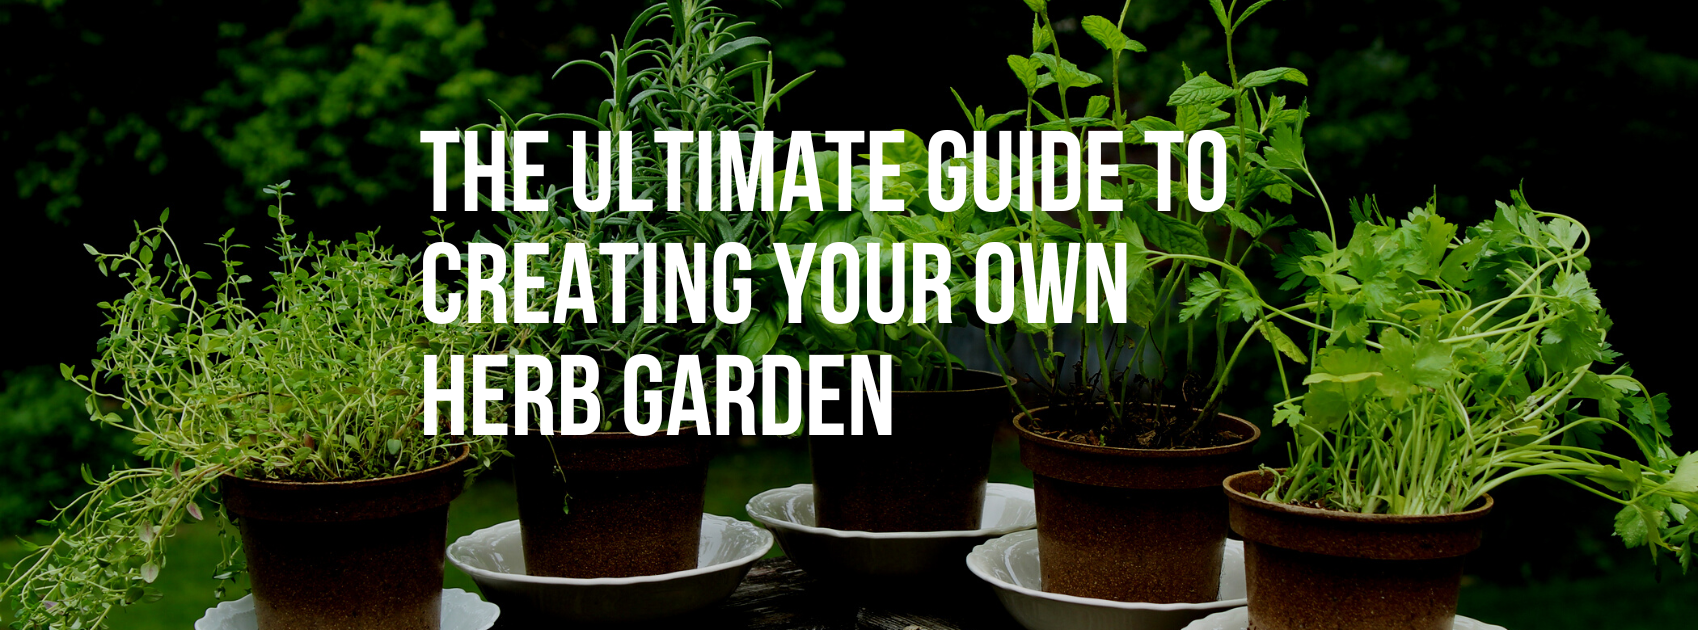 The Ultimate Guide to Creating Your Own Herb Garden